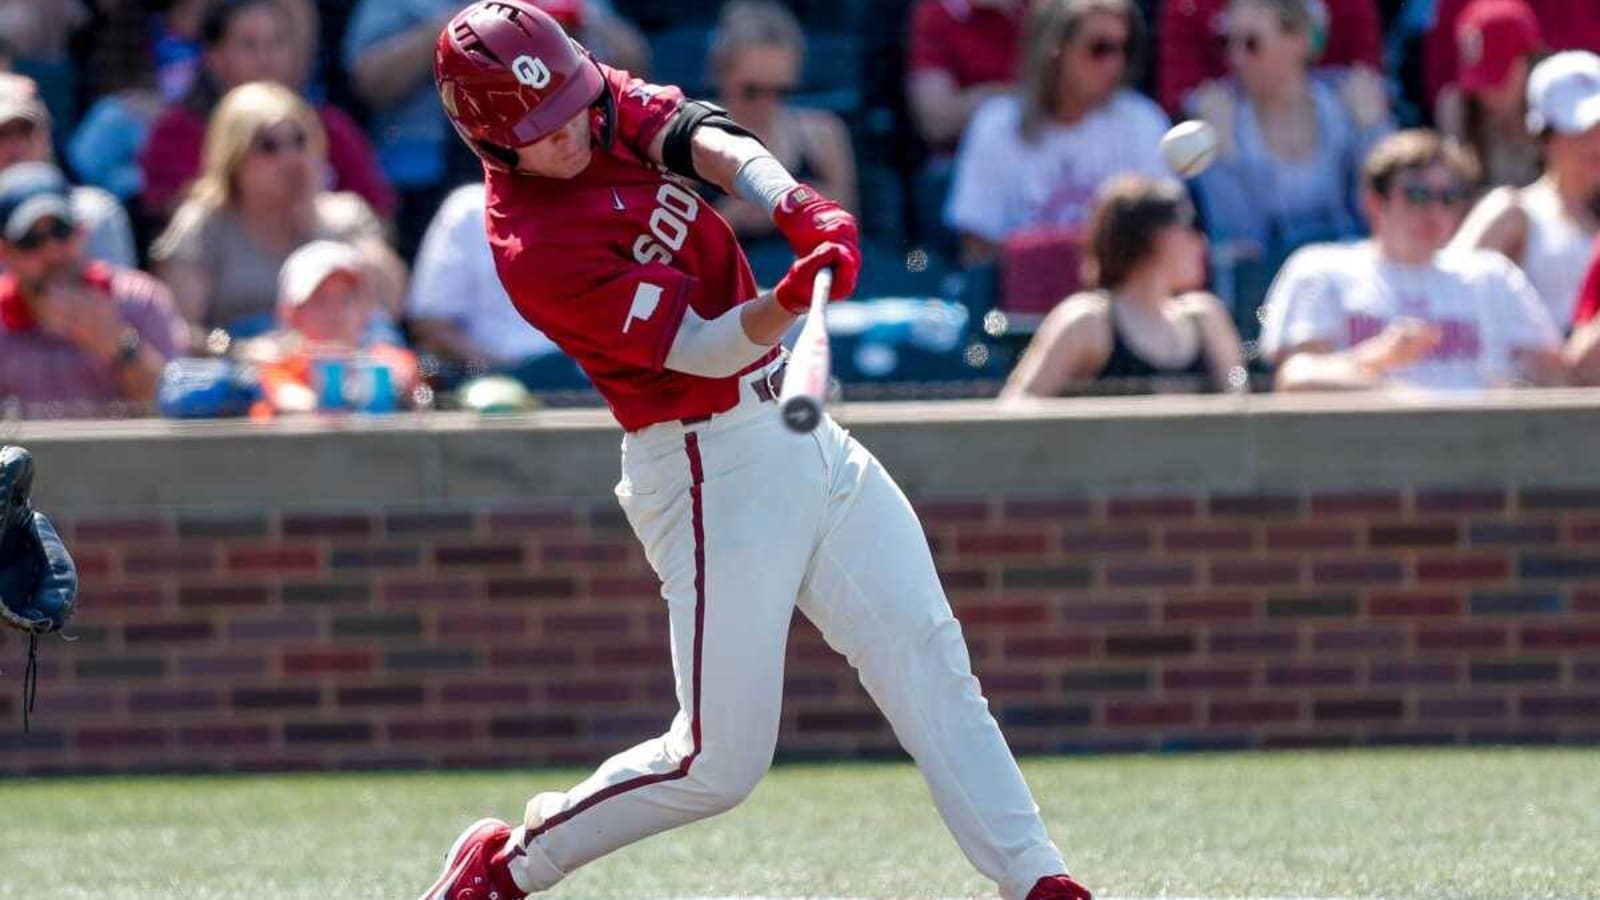 OU Baseball: Oklahoma Bats Heat up in DH Wins Against UCF